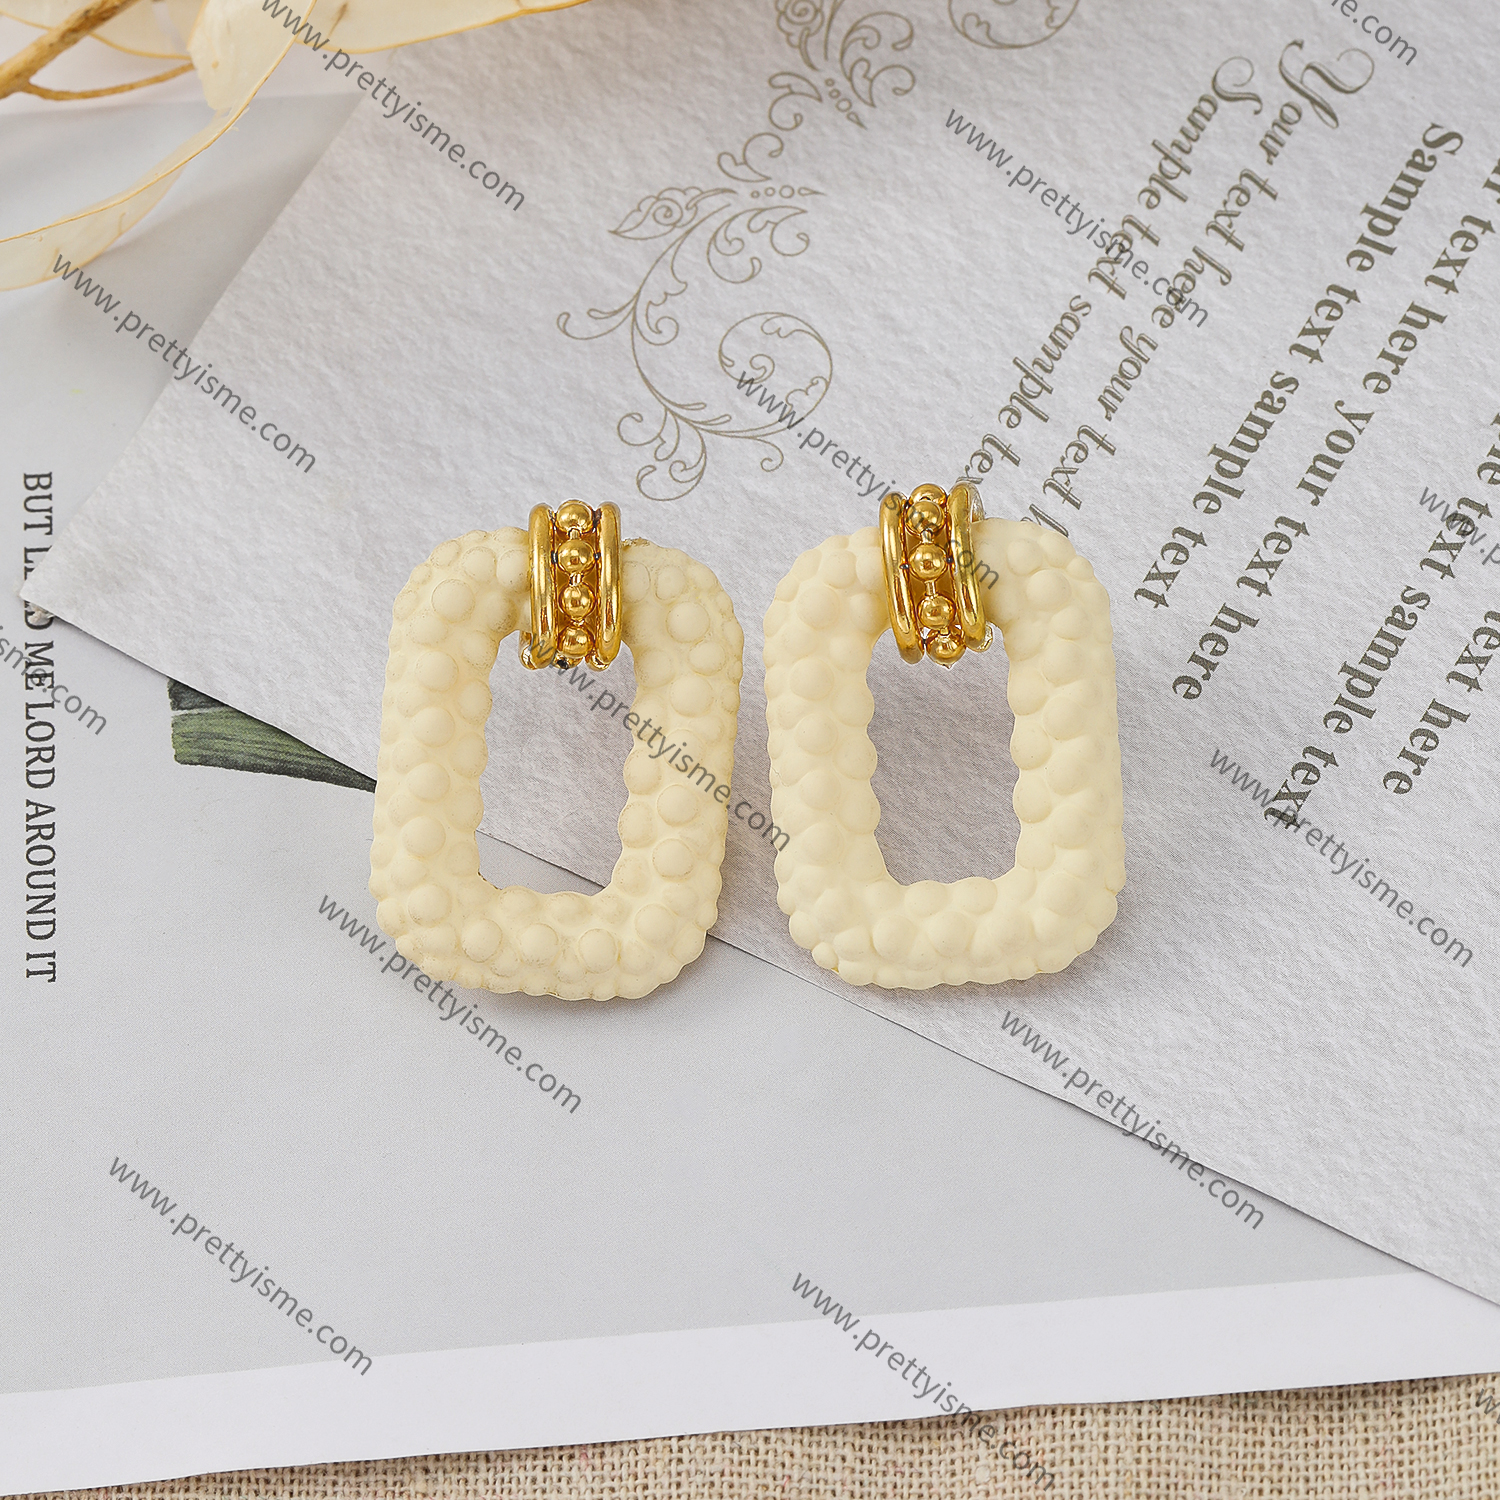 White Square Stainless Steel Earrings with Speckled 18K Gold Plated and Small Gold Beads (3).webp